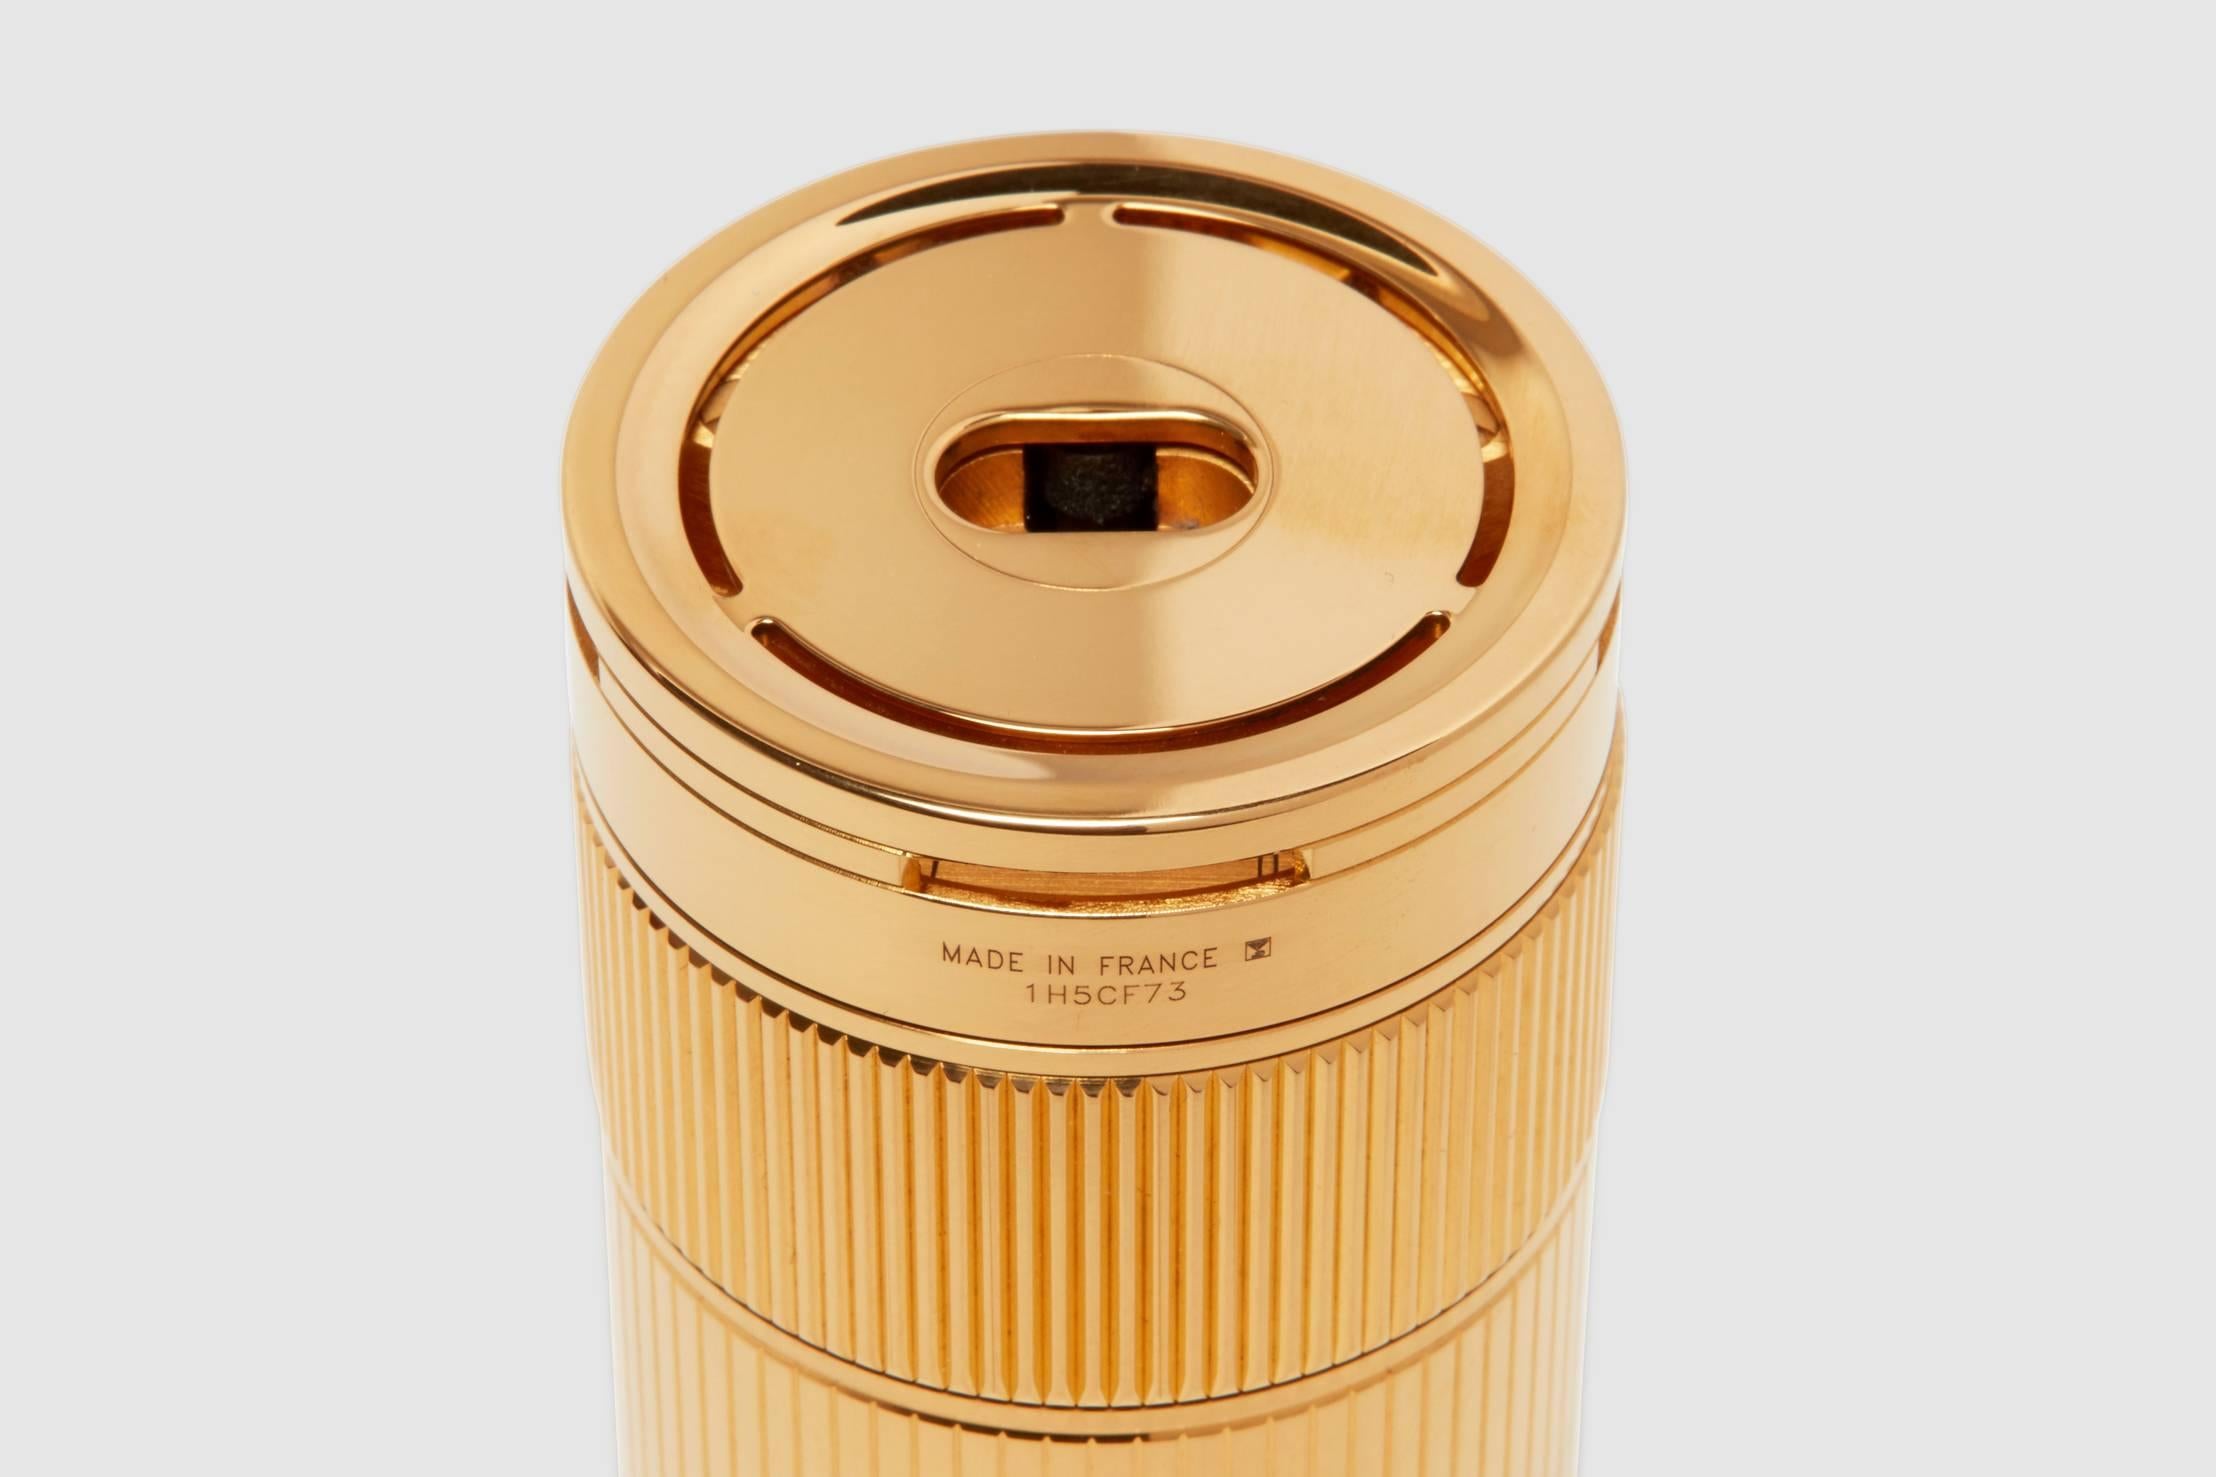 A gold-plated S. T. Dupont cylinder model table lighter. This is one of the finest lighters that money can buy. It is beautiful in design, exceptional in make, and has an ingenious sparking mechanism.

The finely ribbed neck element is turned to